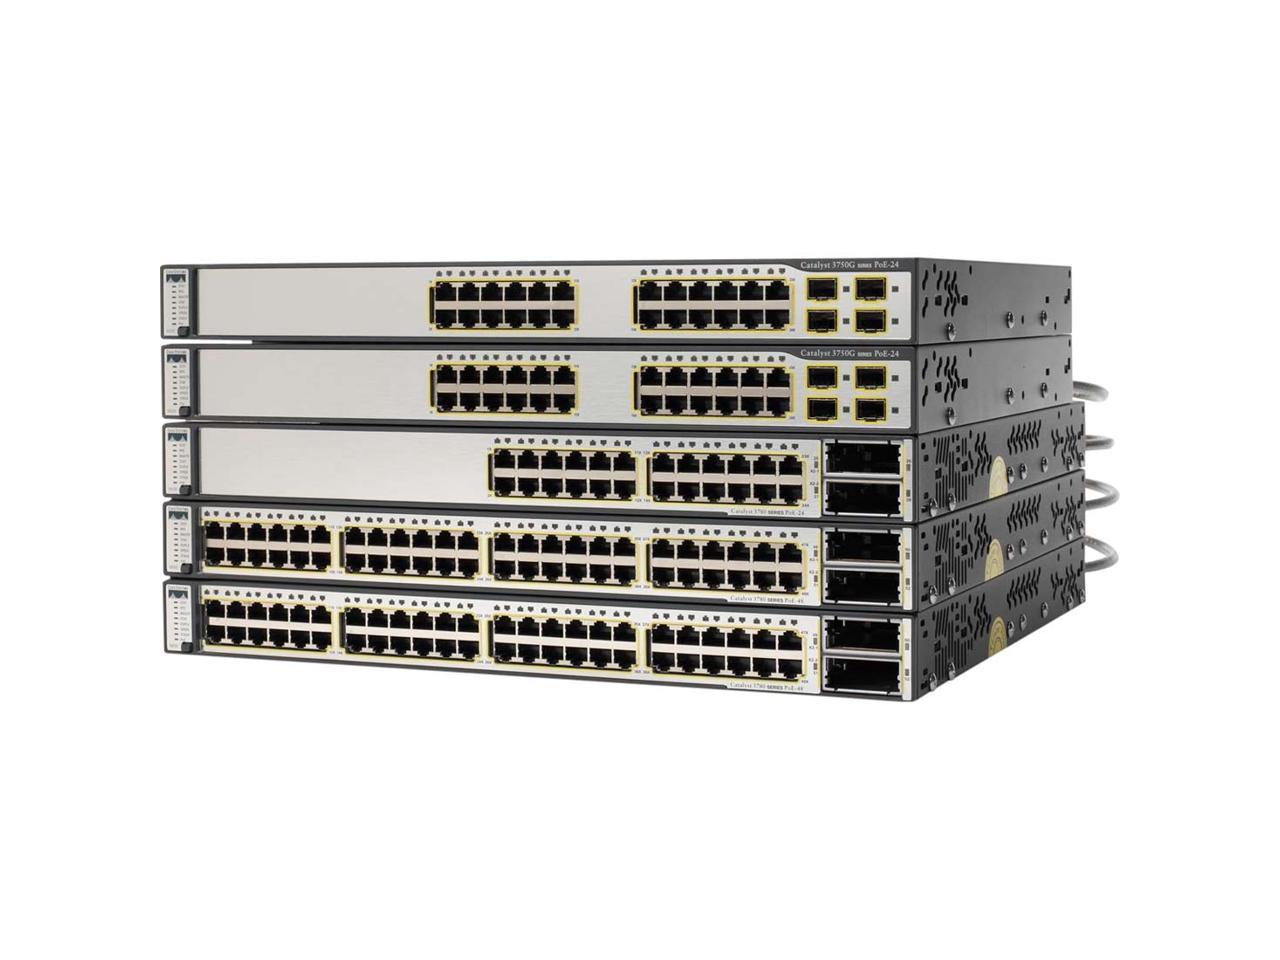 CISCO Catalyst 3750 WS-C3750G-12S-S 10/100/1000Mbps Switch 12 SFP-based Gigabit Ethernet ports Up to 12,000 MAC Address Table 128 MB DRAM and 16 MB Flash memory Buffer Memory